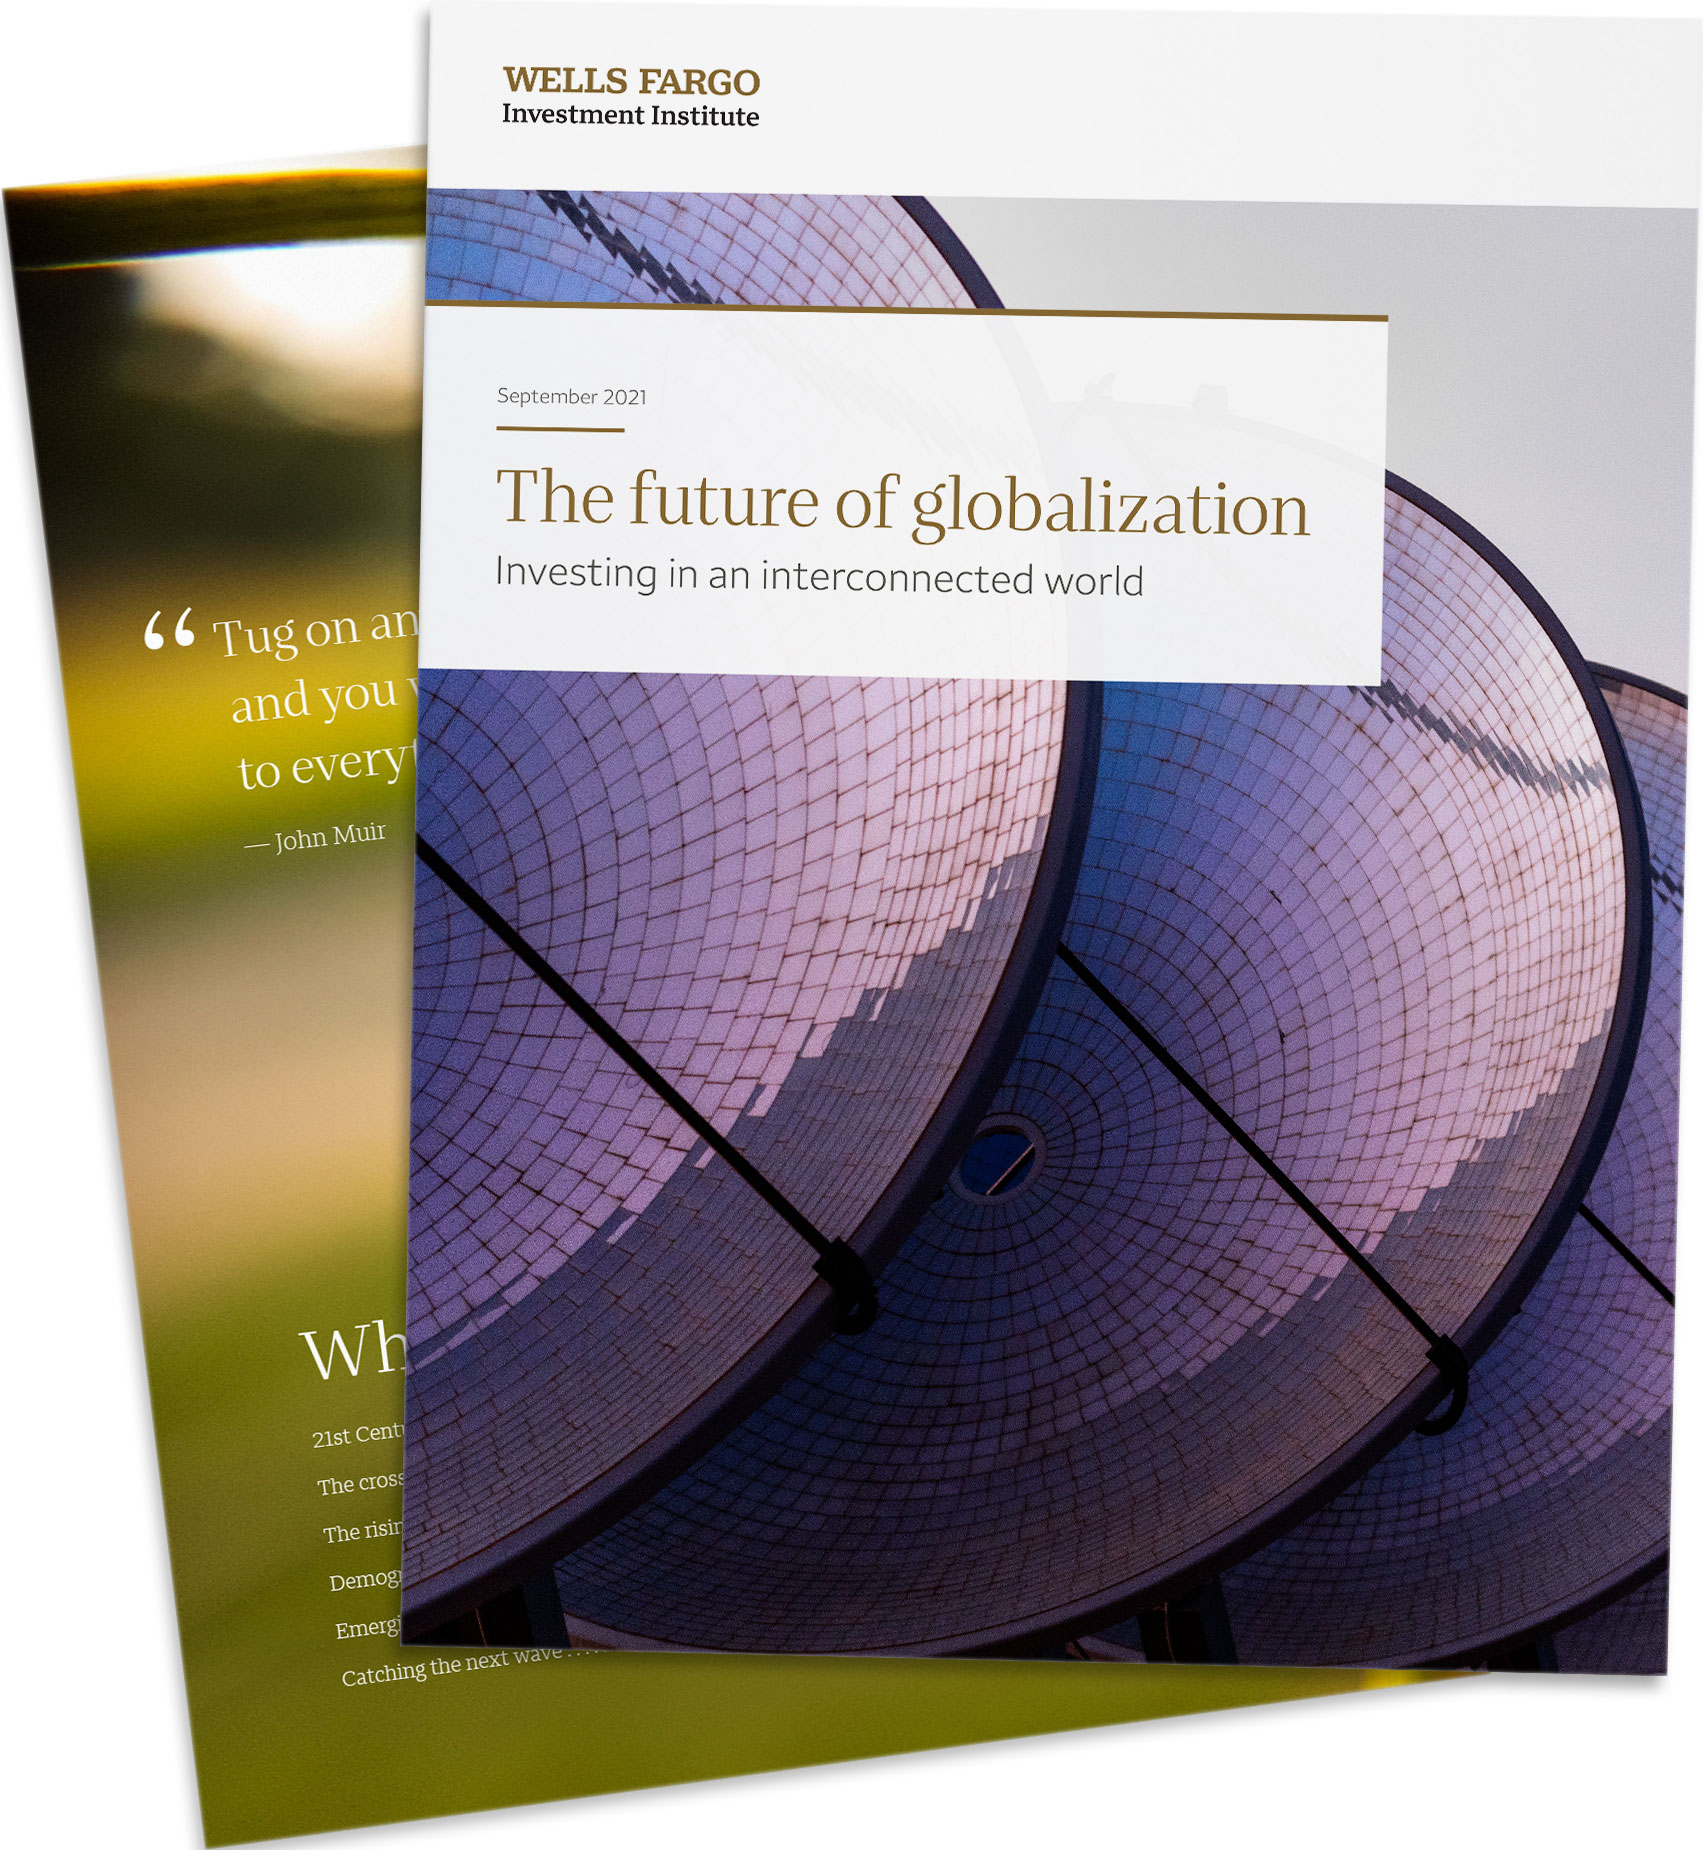 Cover image of The Future of Globalization brochure